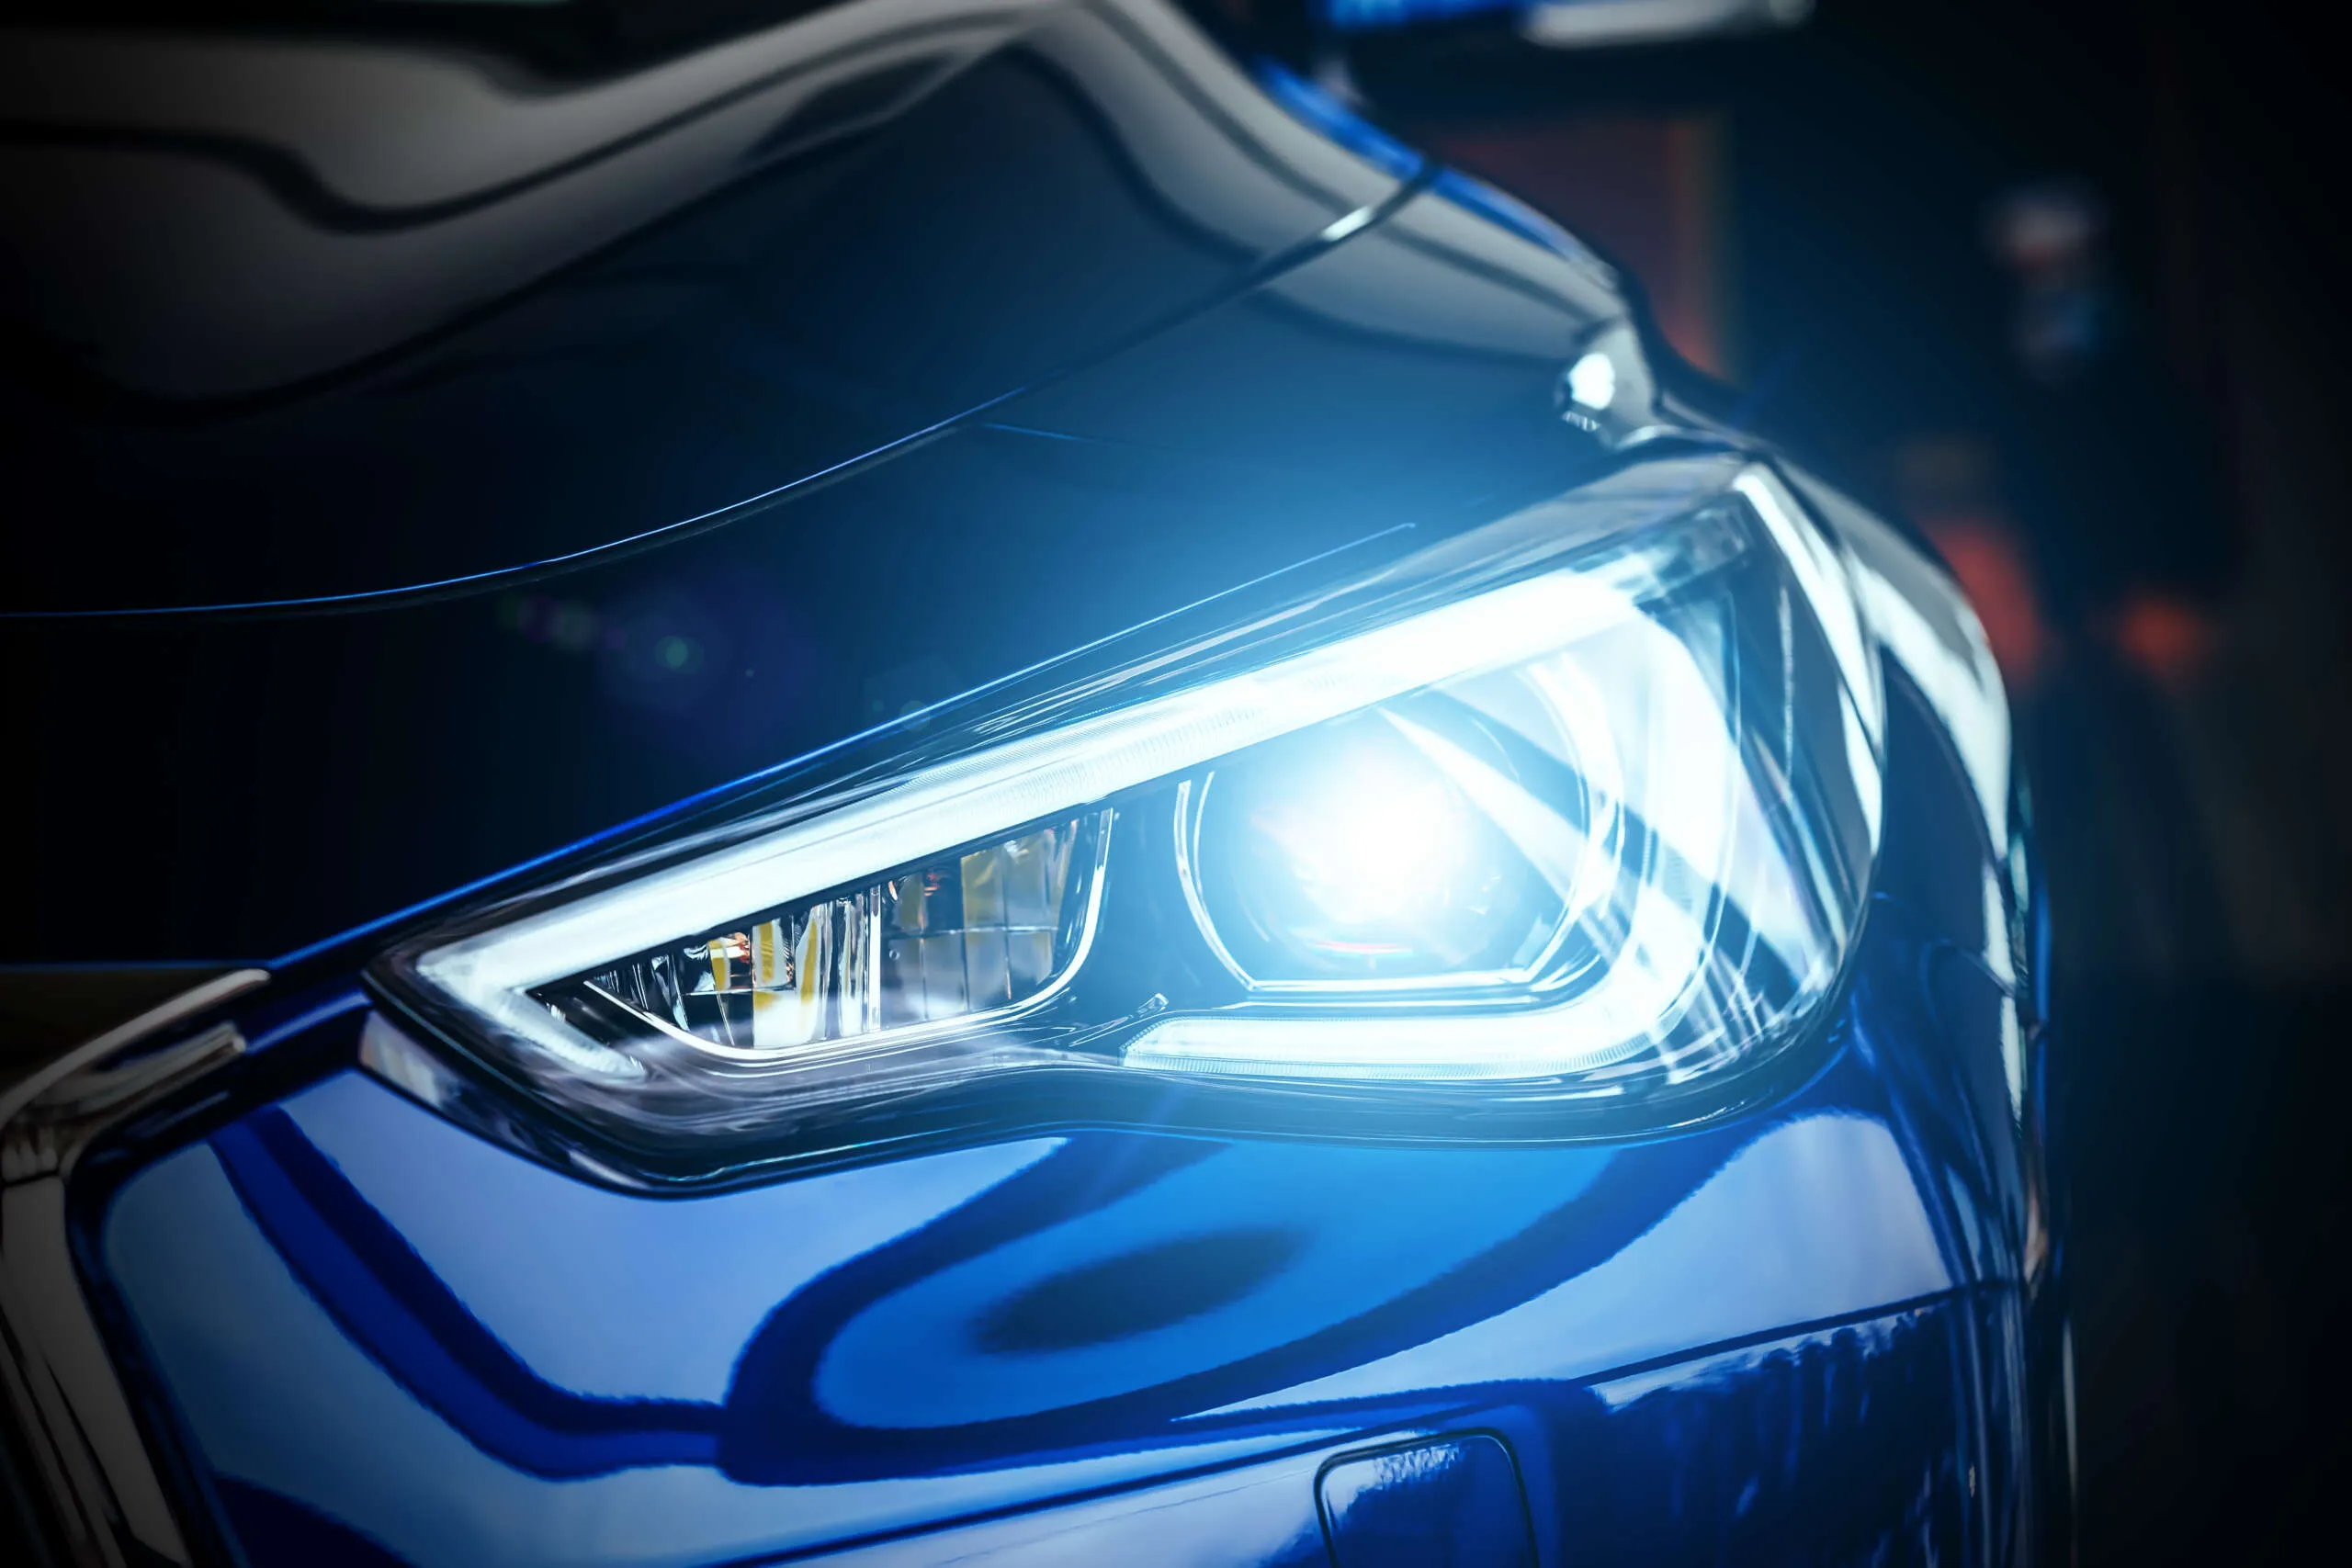 Halogen vs HID vs LED: Which Headlights Are Best?